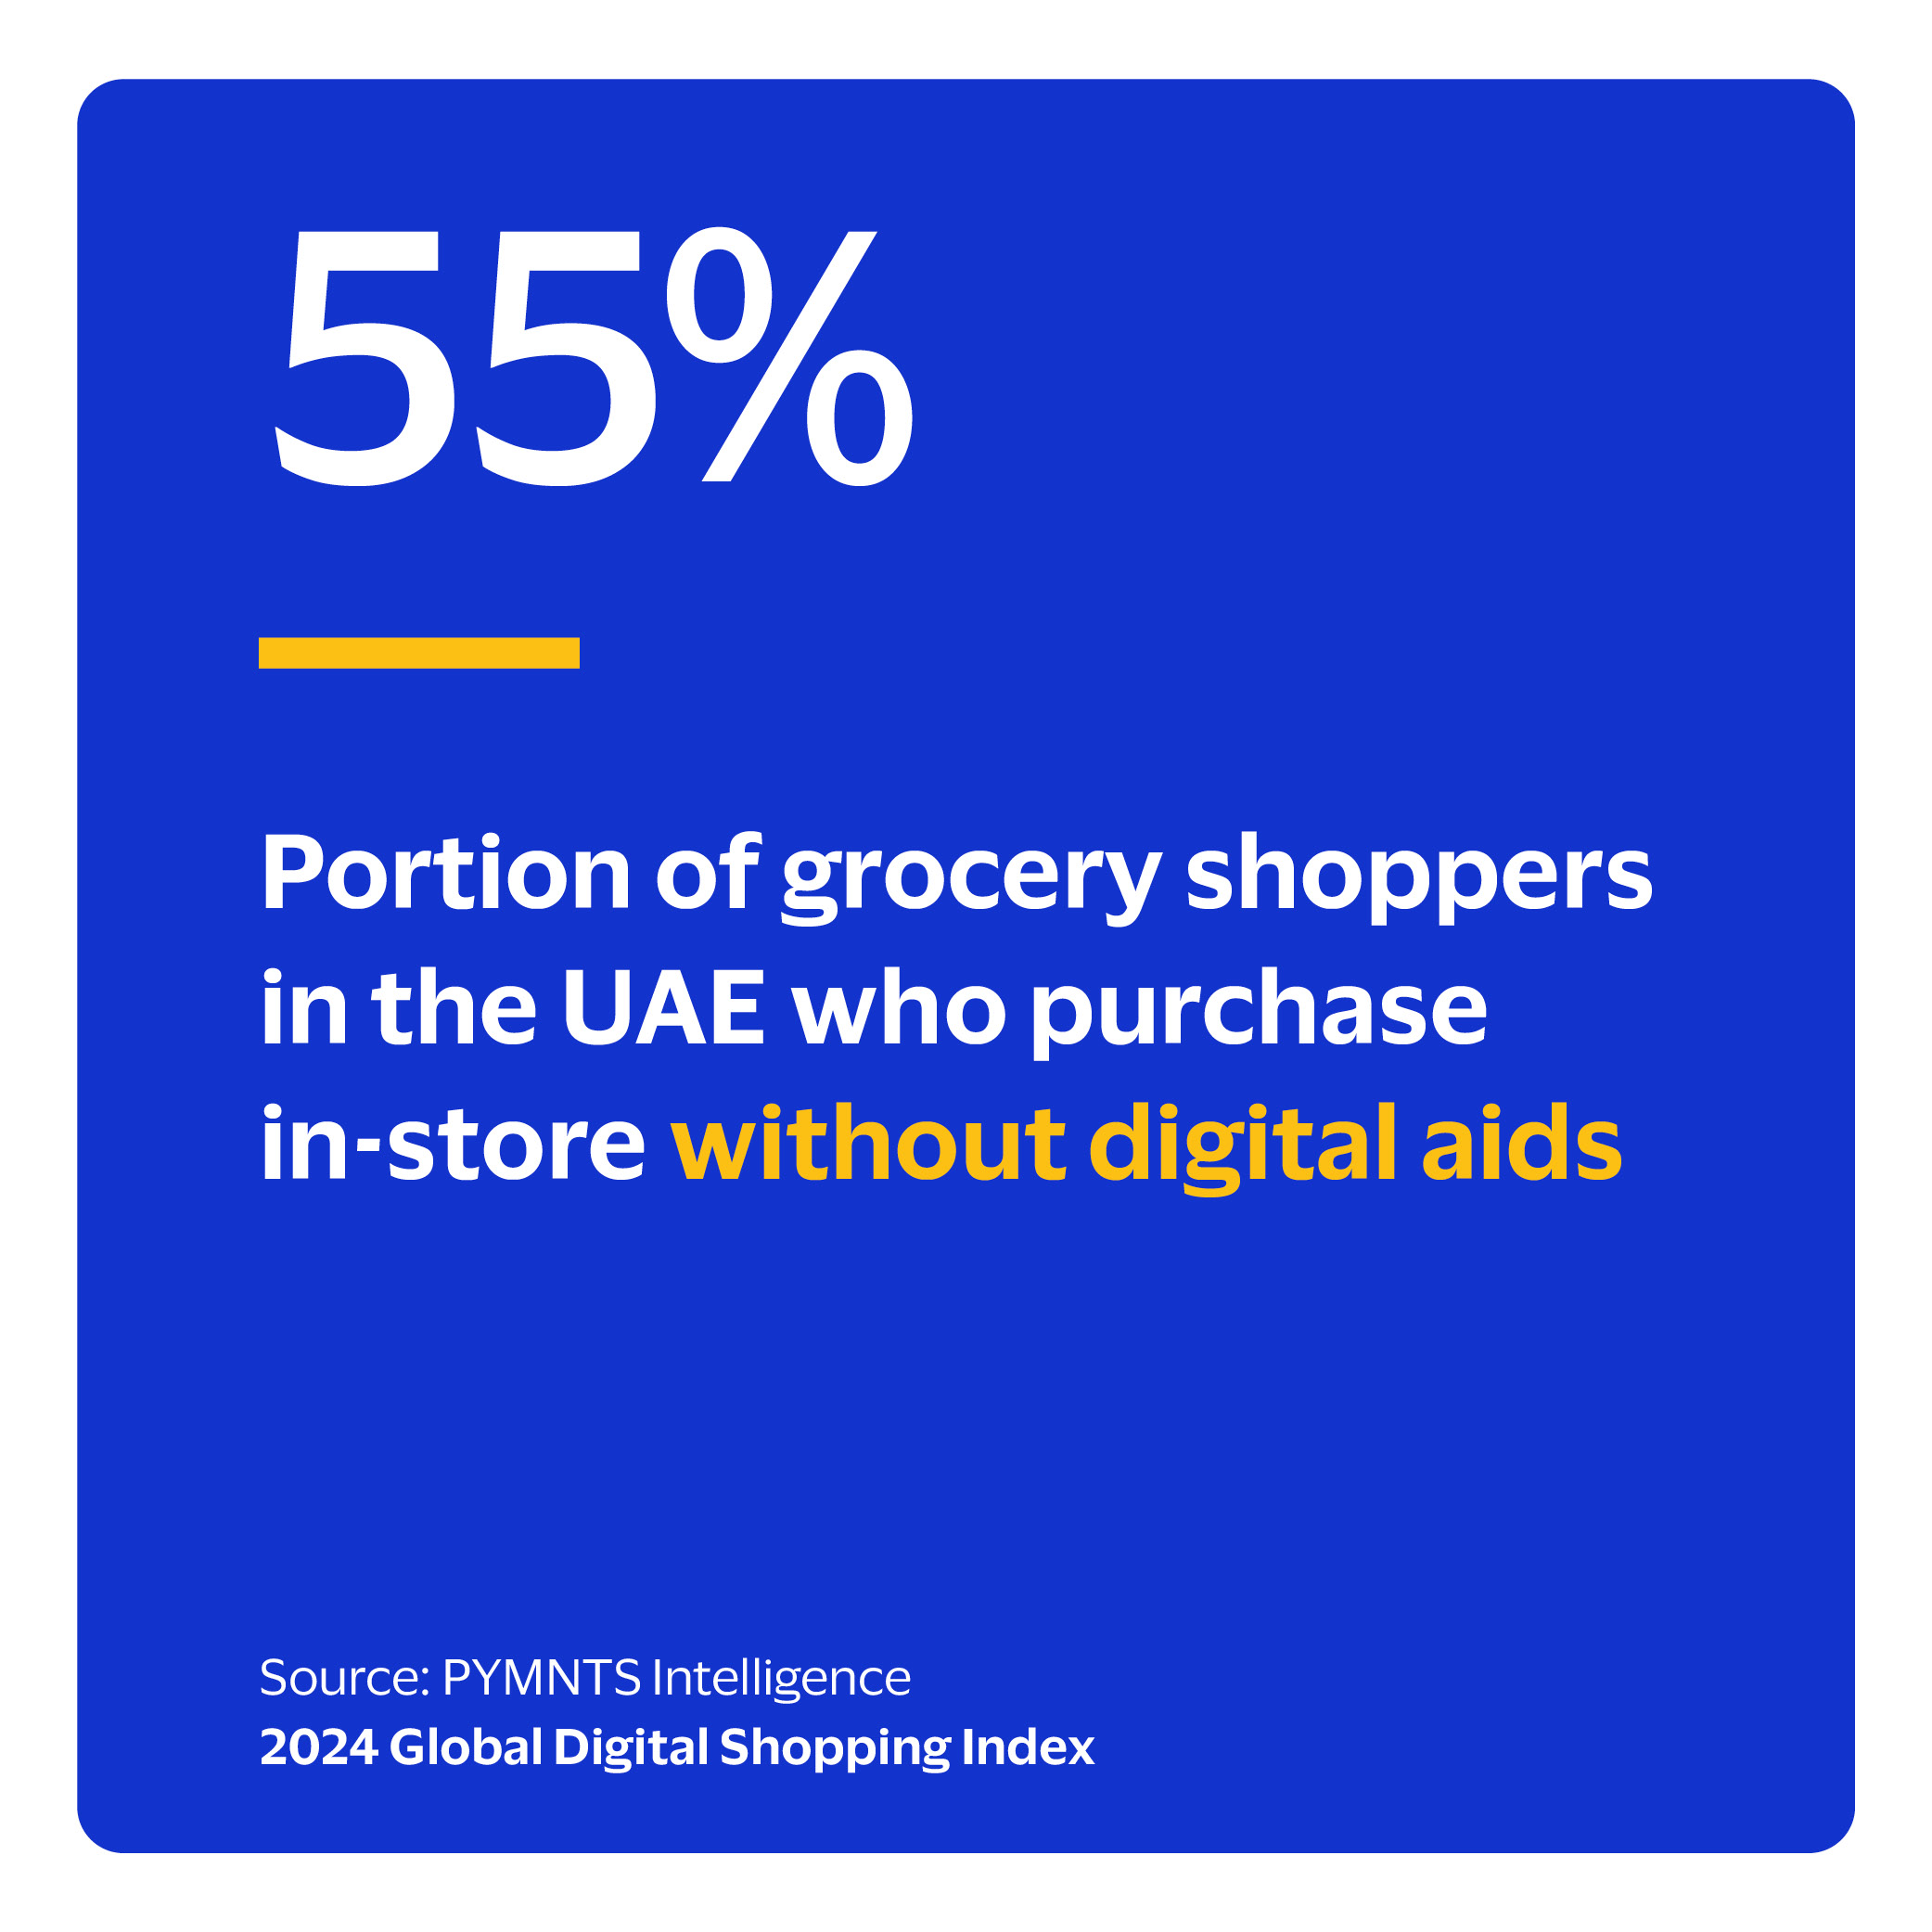 55%: Portion of grocery shoppers in the UAE who purchase in-store without digital aids